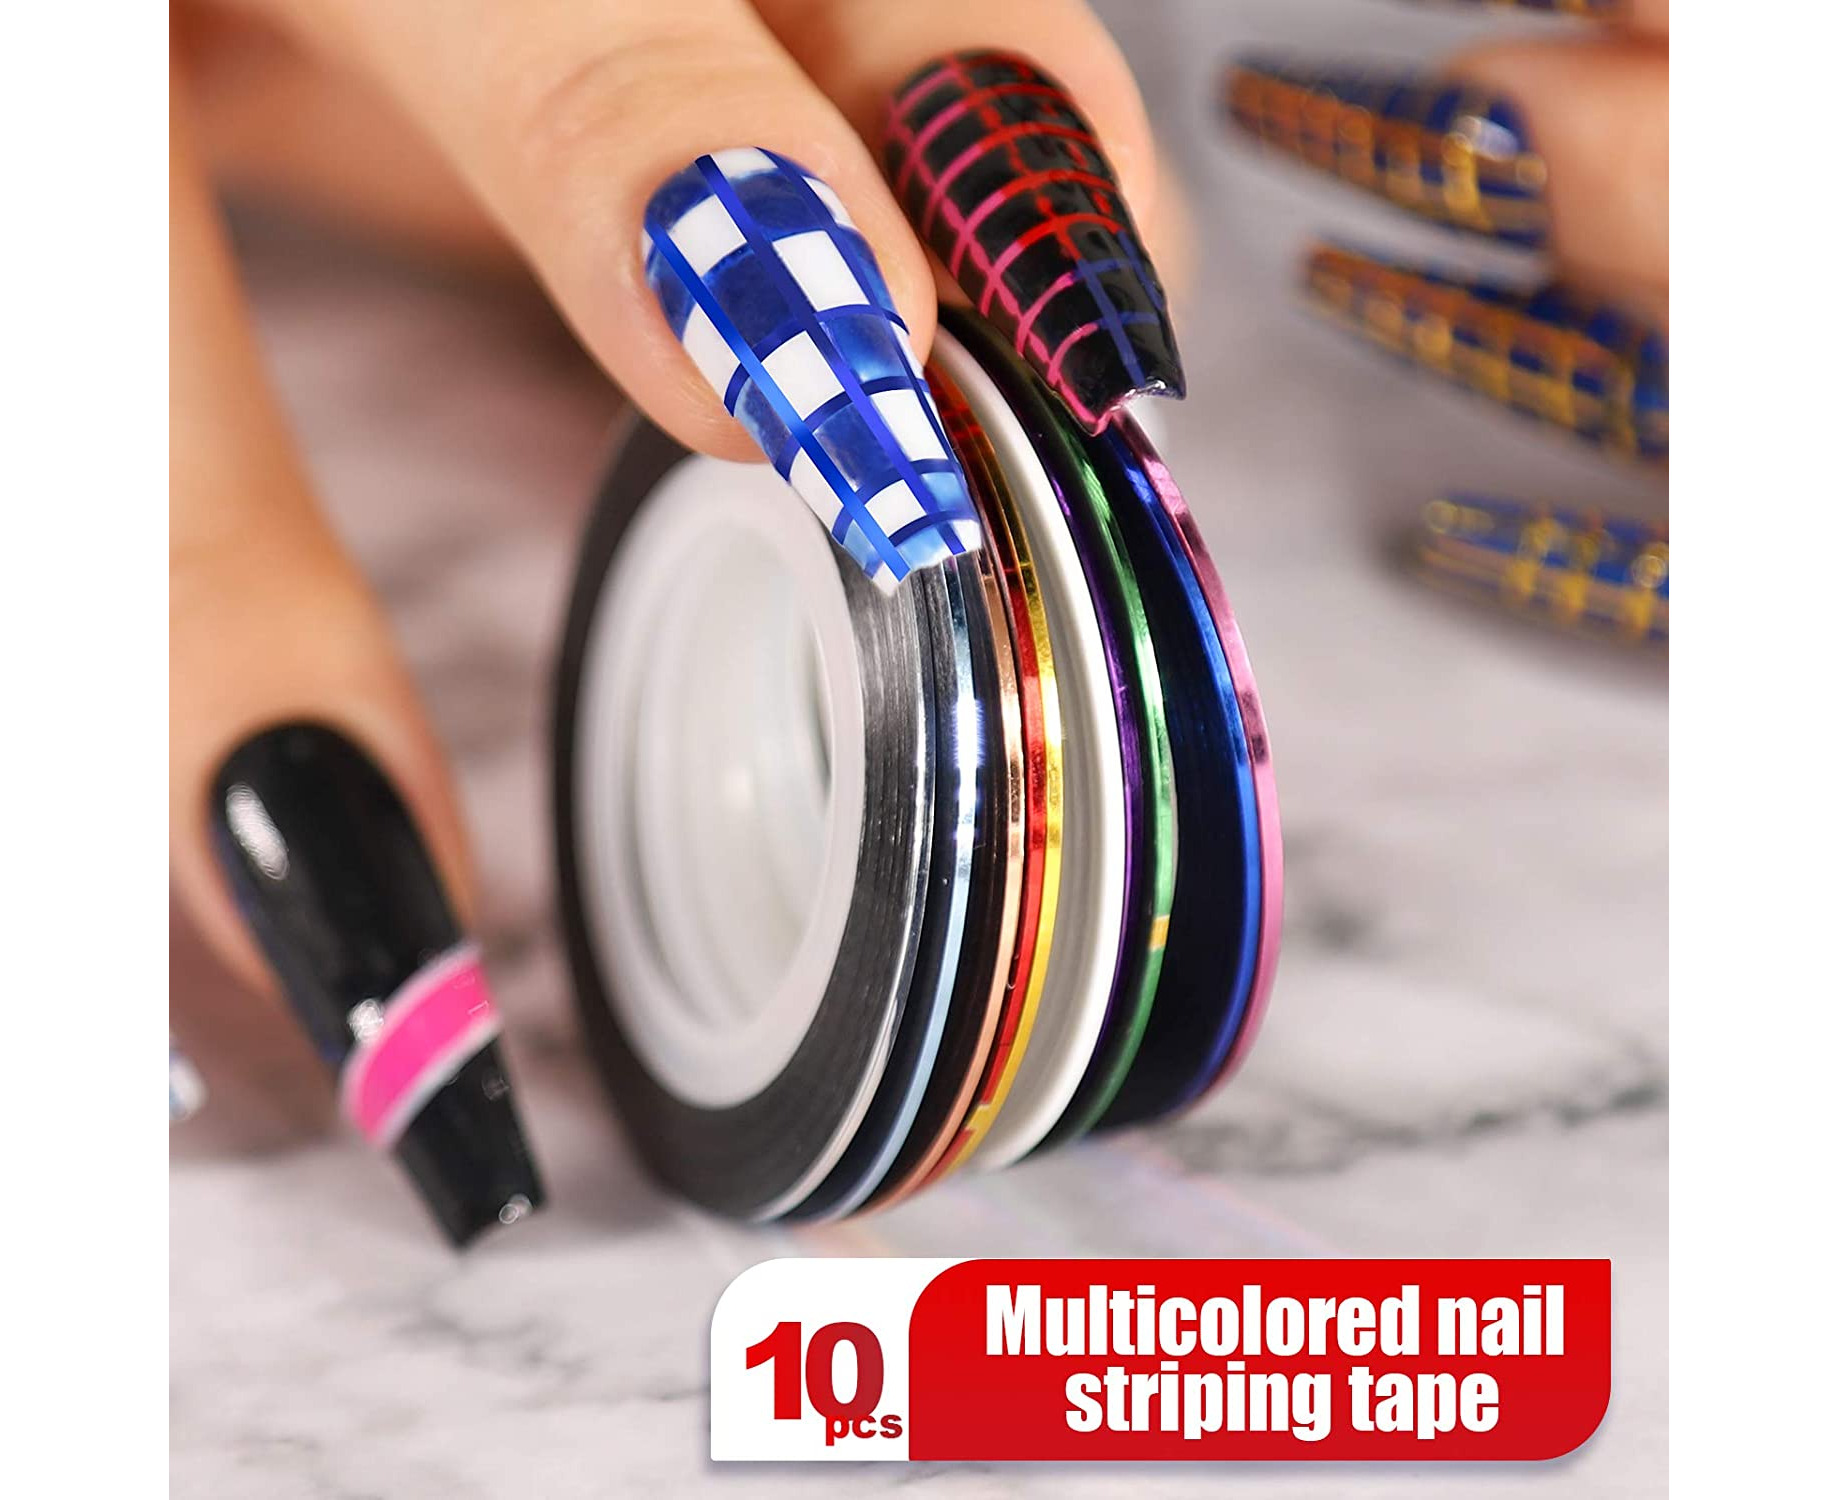 Nail Art Pen Acrylic Handle Brushes Double Head Silicone Nail Tool